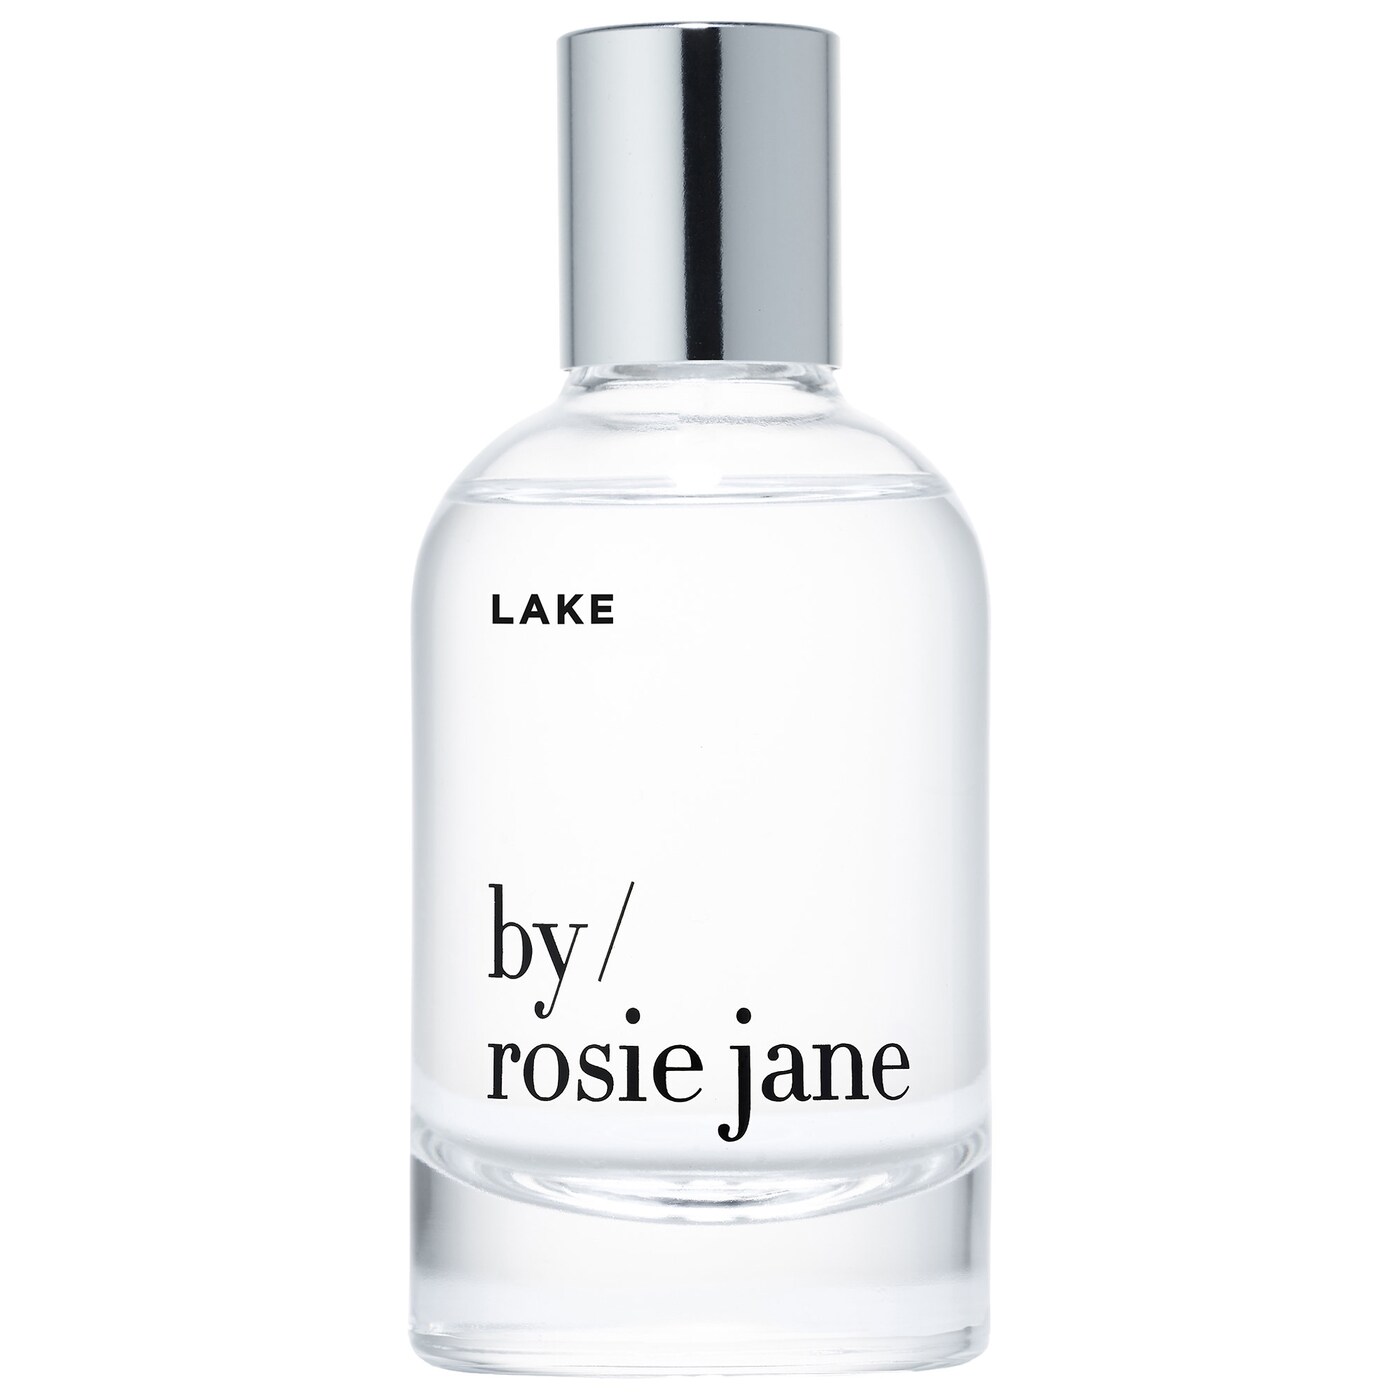 lake by rosie jane perfume, a vacation scent, on a white background